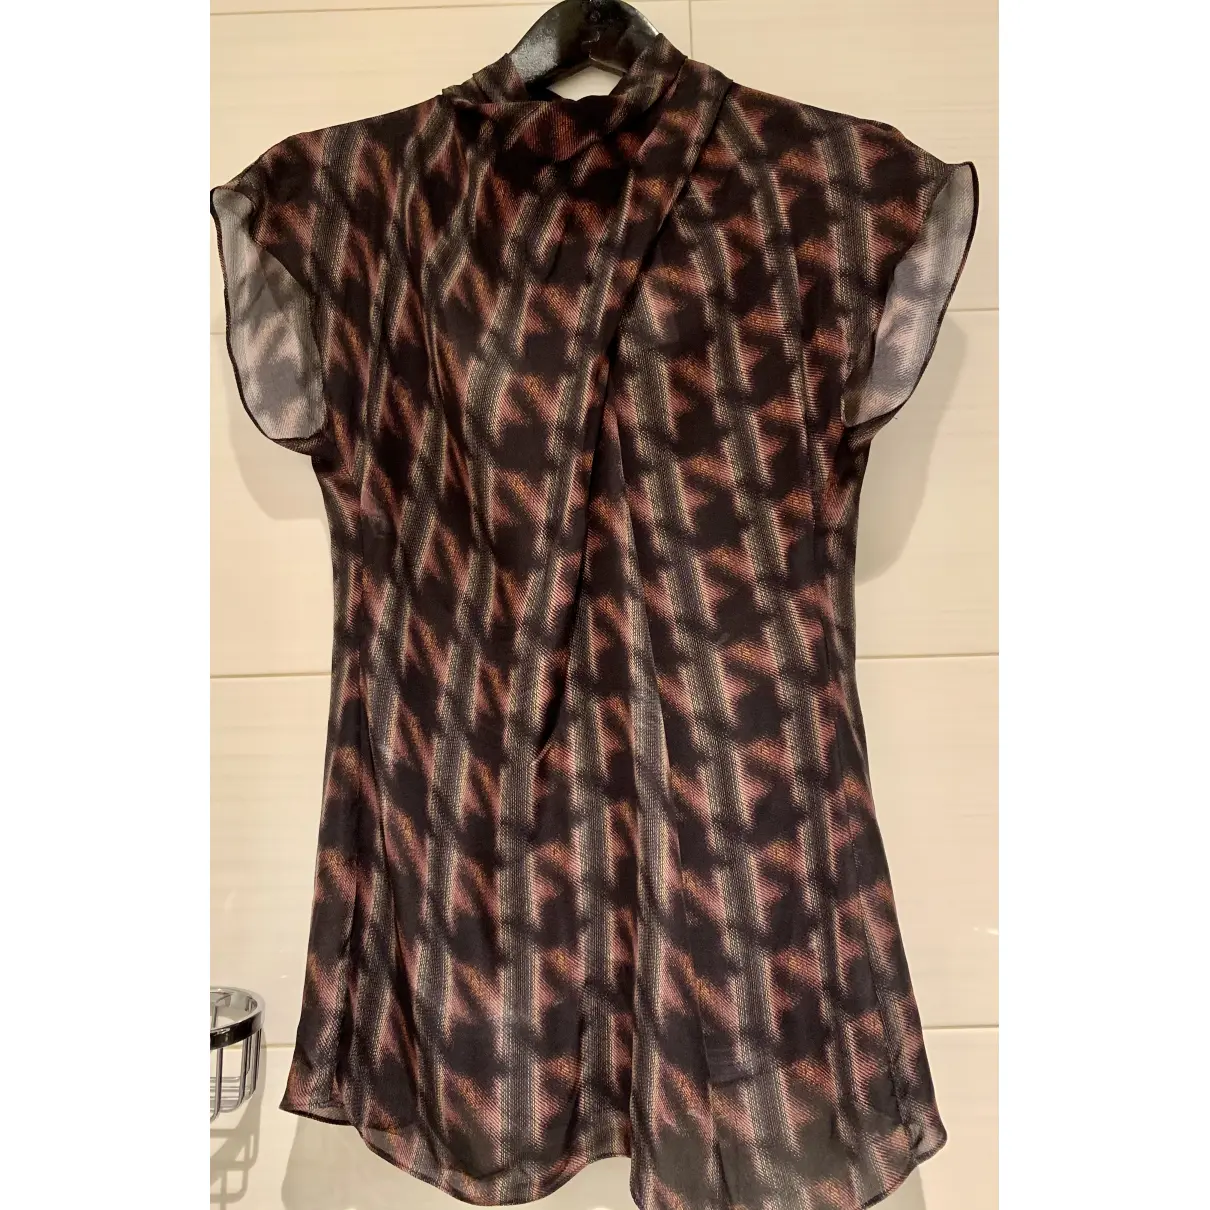 Buy Gucci Silk blouse online